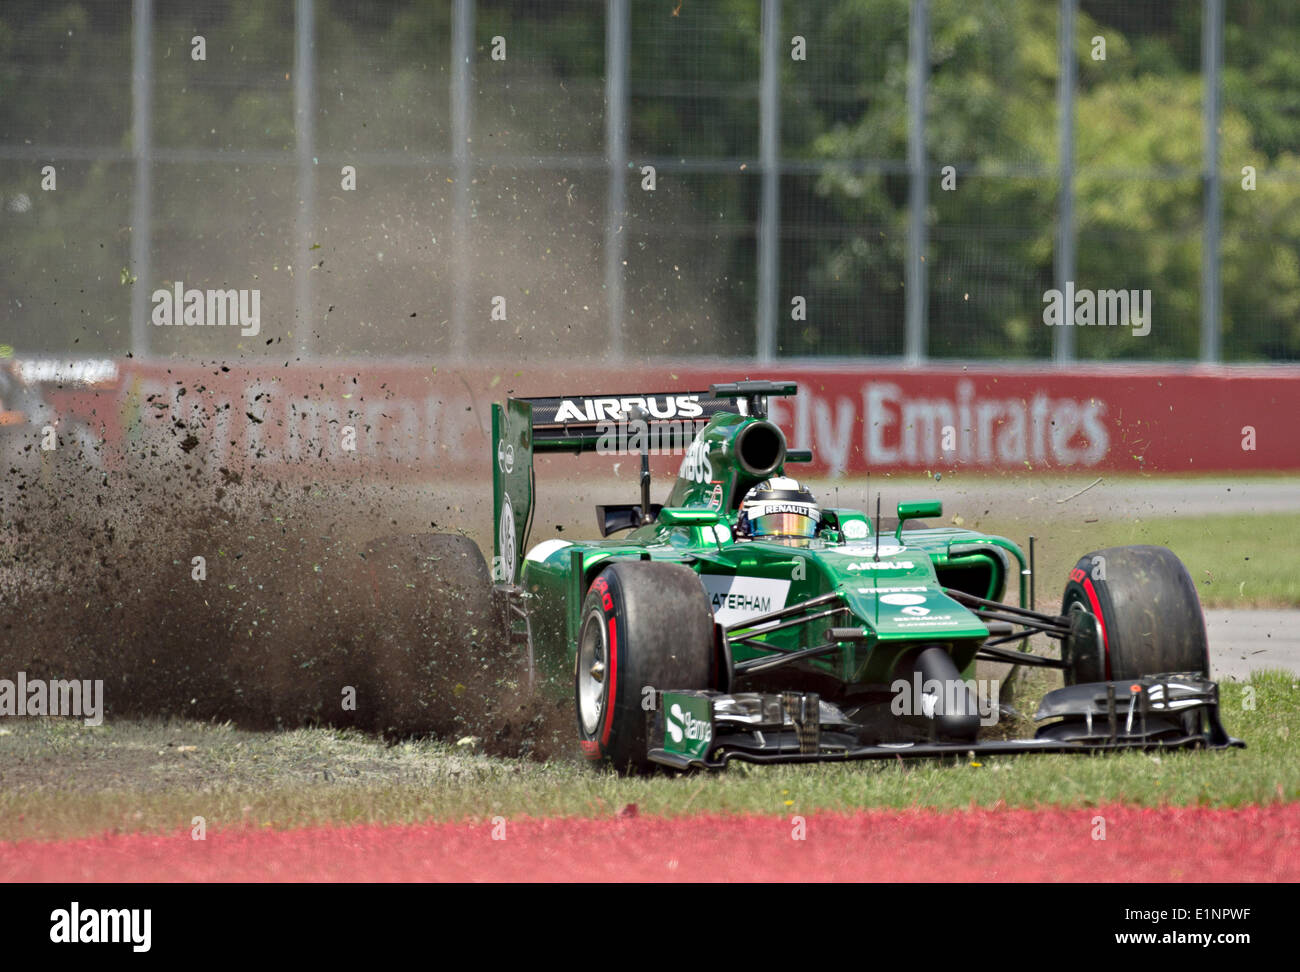 Montreal, Canada. 7th June, 2014. Caterham Formula One driver Kamui Kobayashi of Japan goes off the track during the qualifying session of 2014 Canadian Formula One Grand Prix at the Circuit Gilles Villeneuve in Montreal, Canada, on June 7, 2014. Credit:  Andrew Soong/Xinhua/Alamy Live News Stock Photo